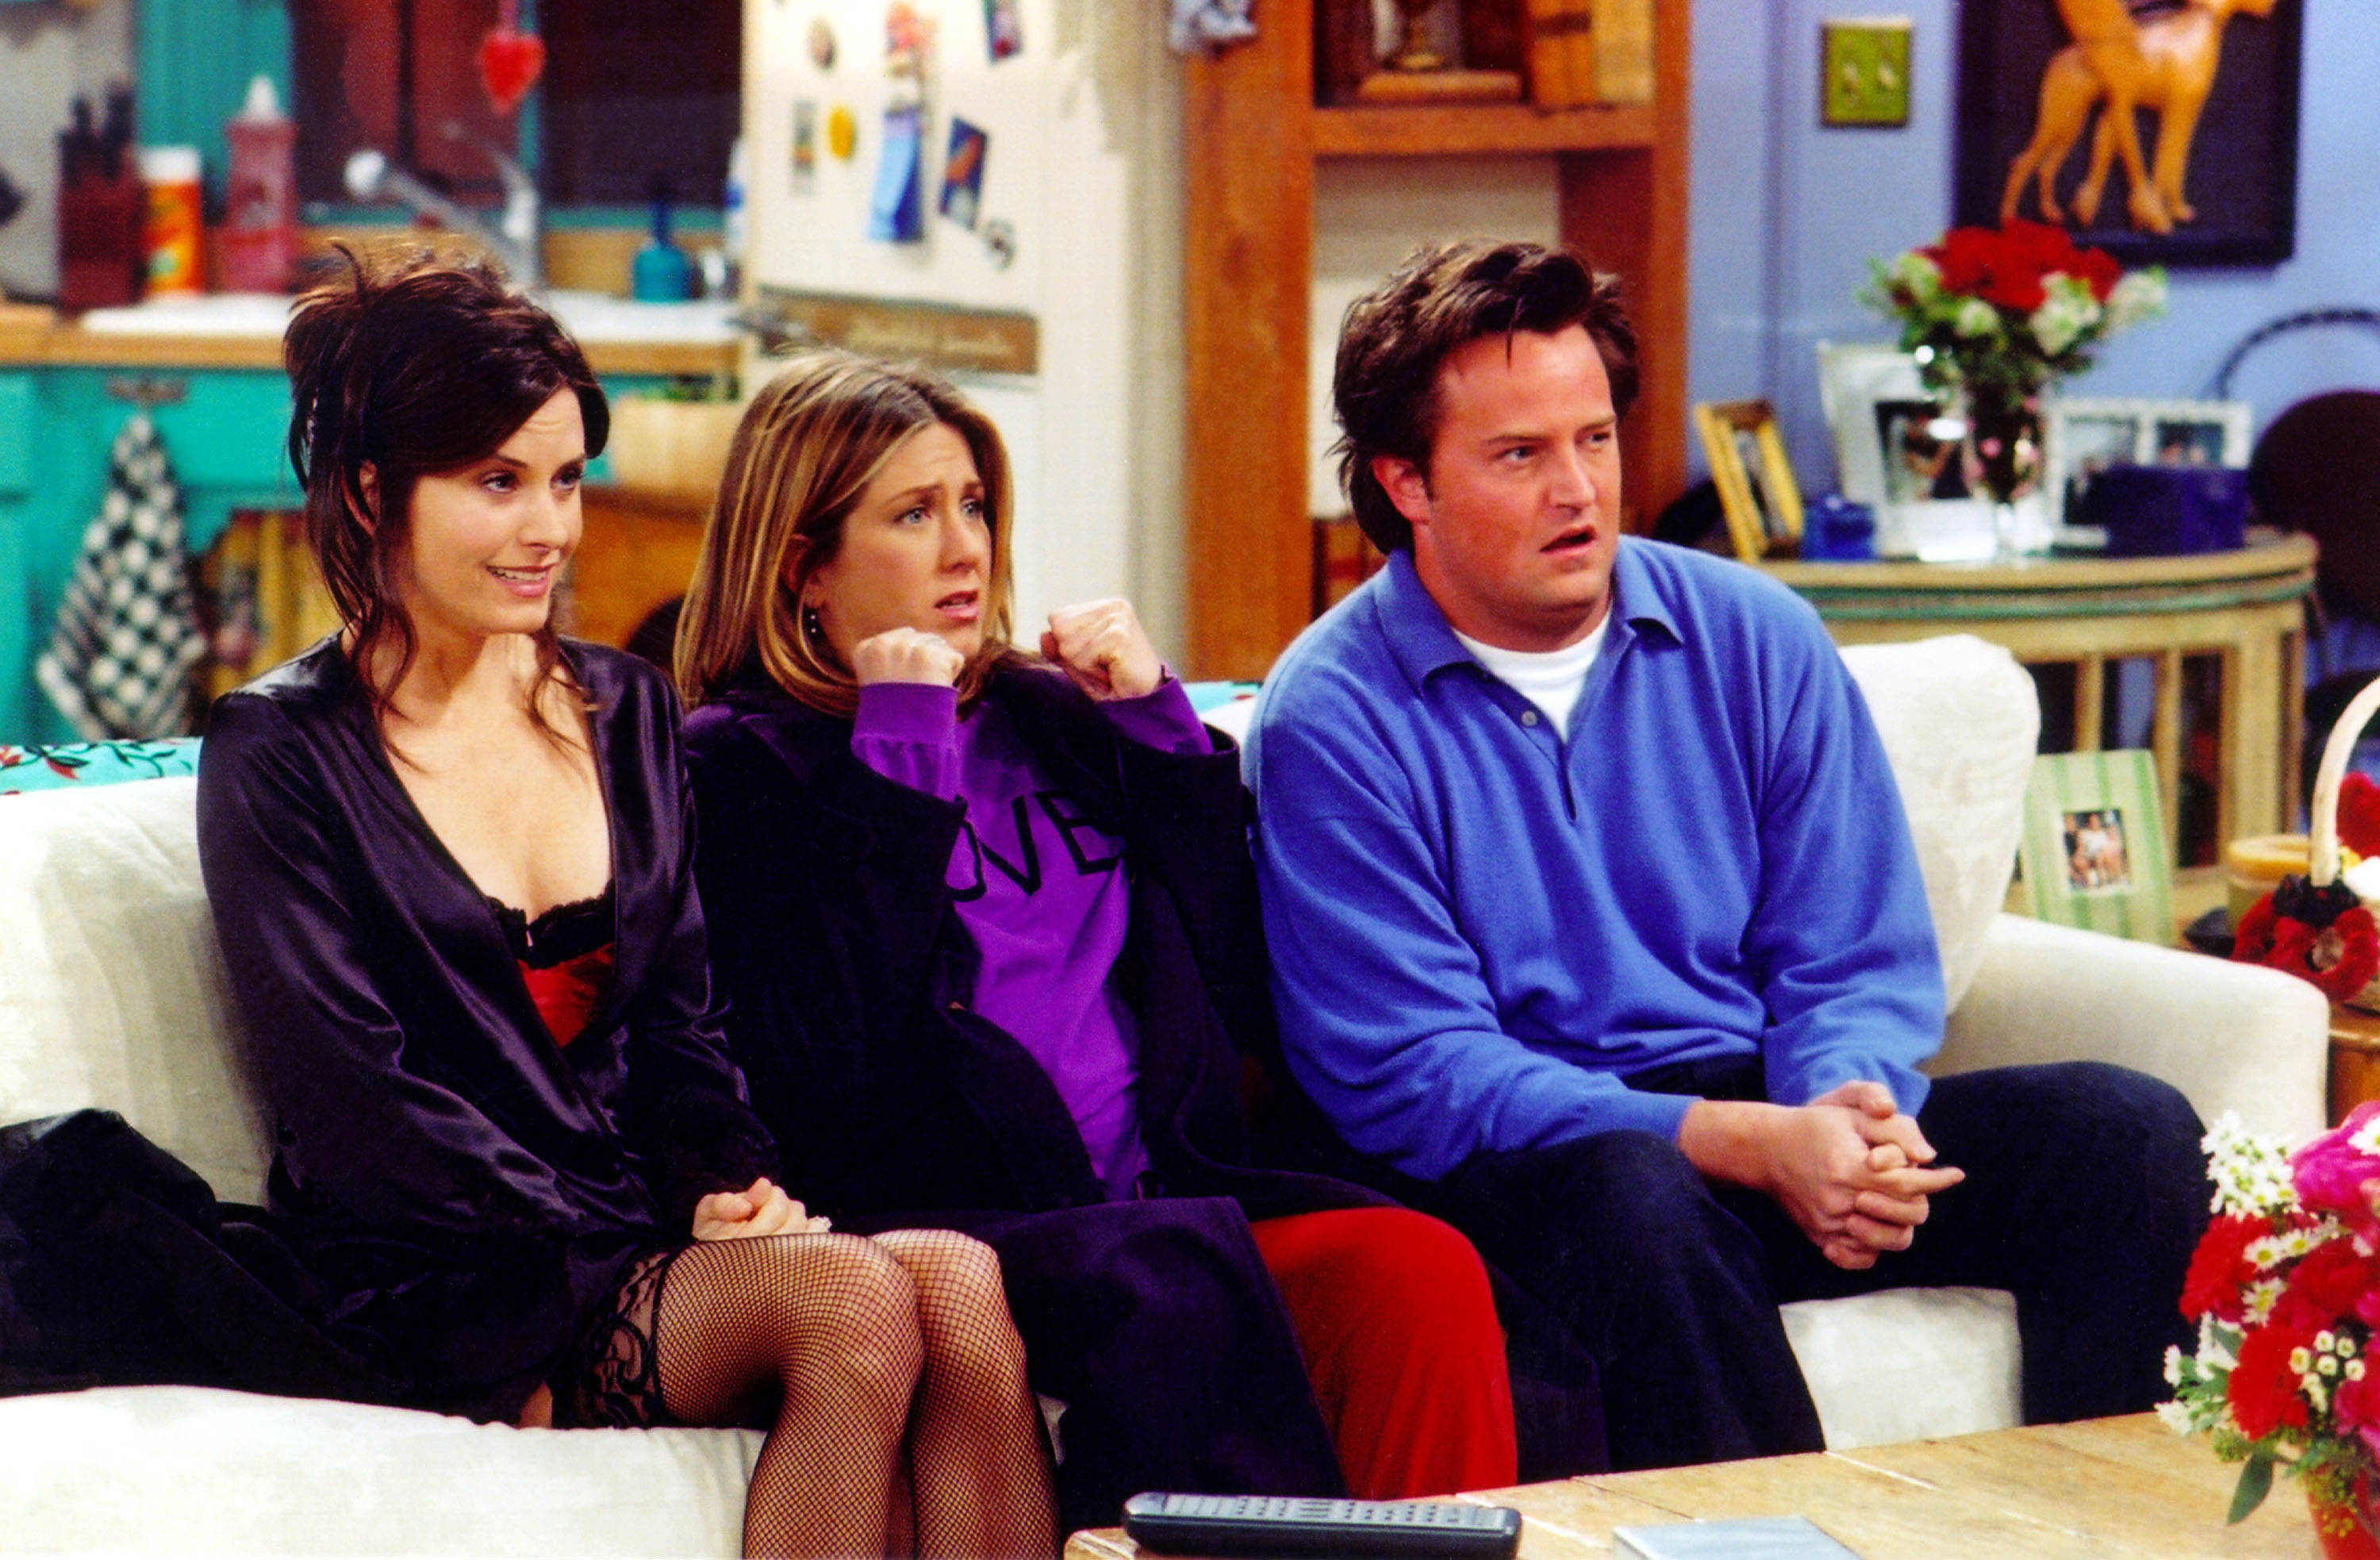 Courteney Cox Arquette, Jennifer Aniston, and Matthew Perry are shown in a scene from the NBC series "Friends" in New York City | Source: Getty Images